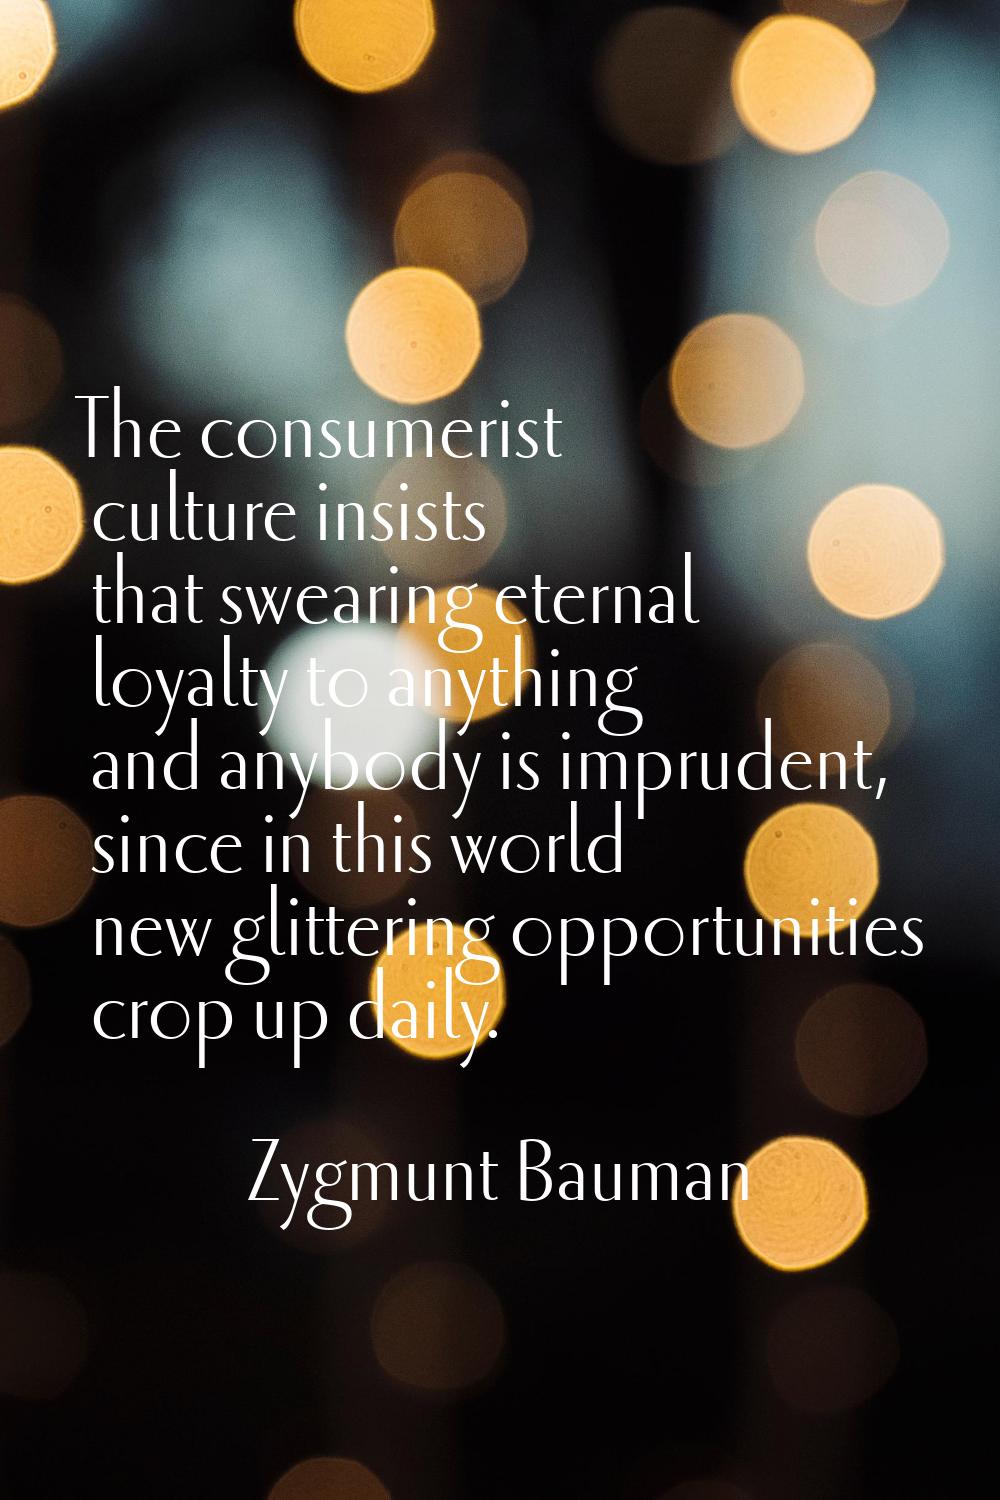 The consumerist culture insists that swearing eternal loyalty to anything and anybody is imprudent,